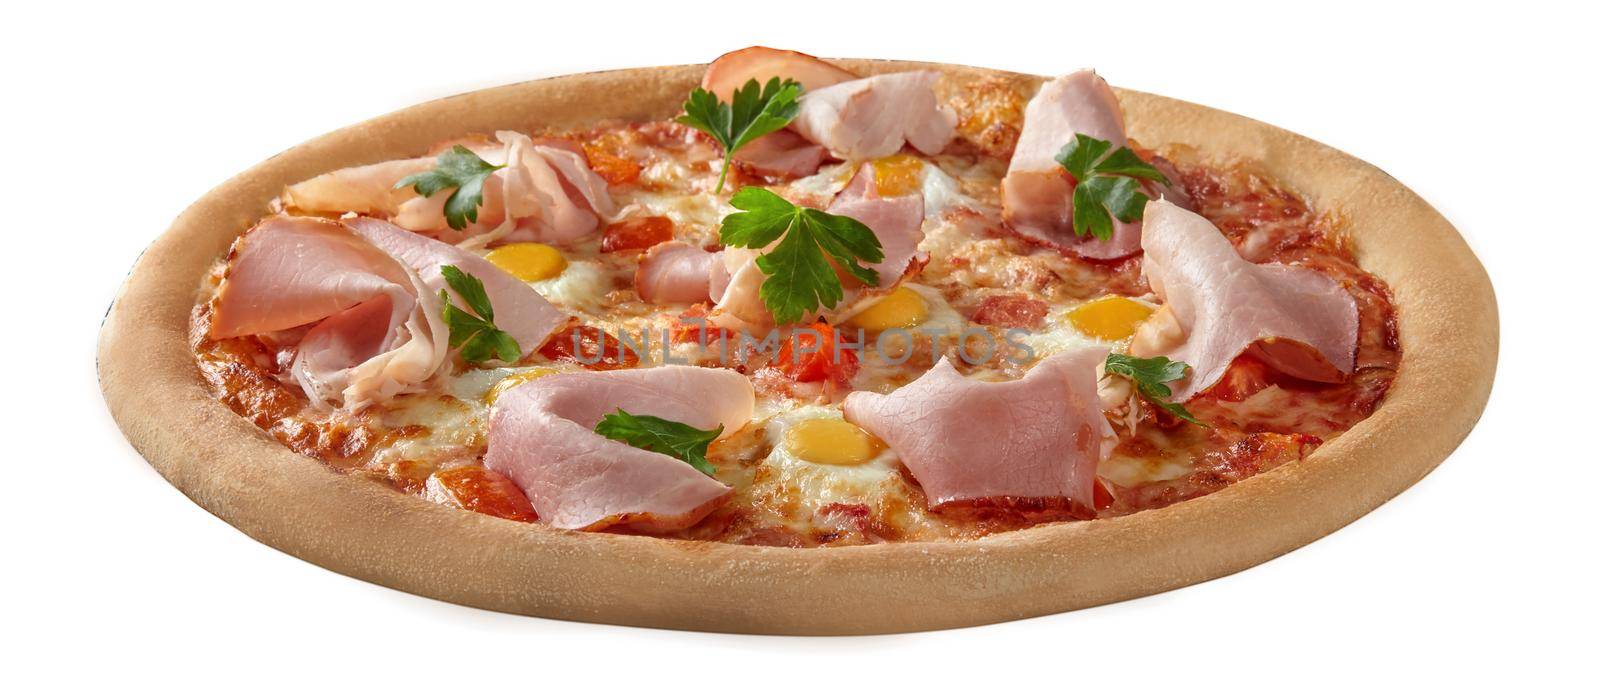 Pizza with sliced ham, quail eggs and tomatoes on pelati sauce, melted mozzarella and greens by nazarovsergey